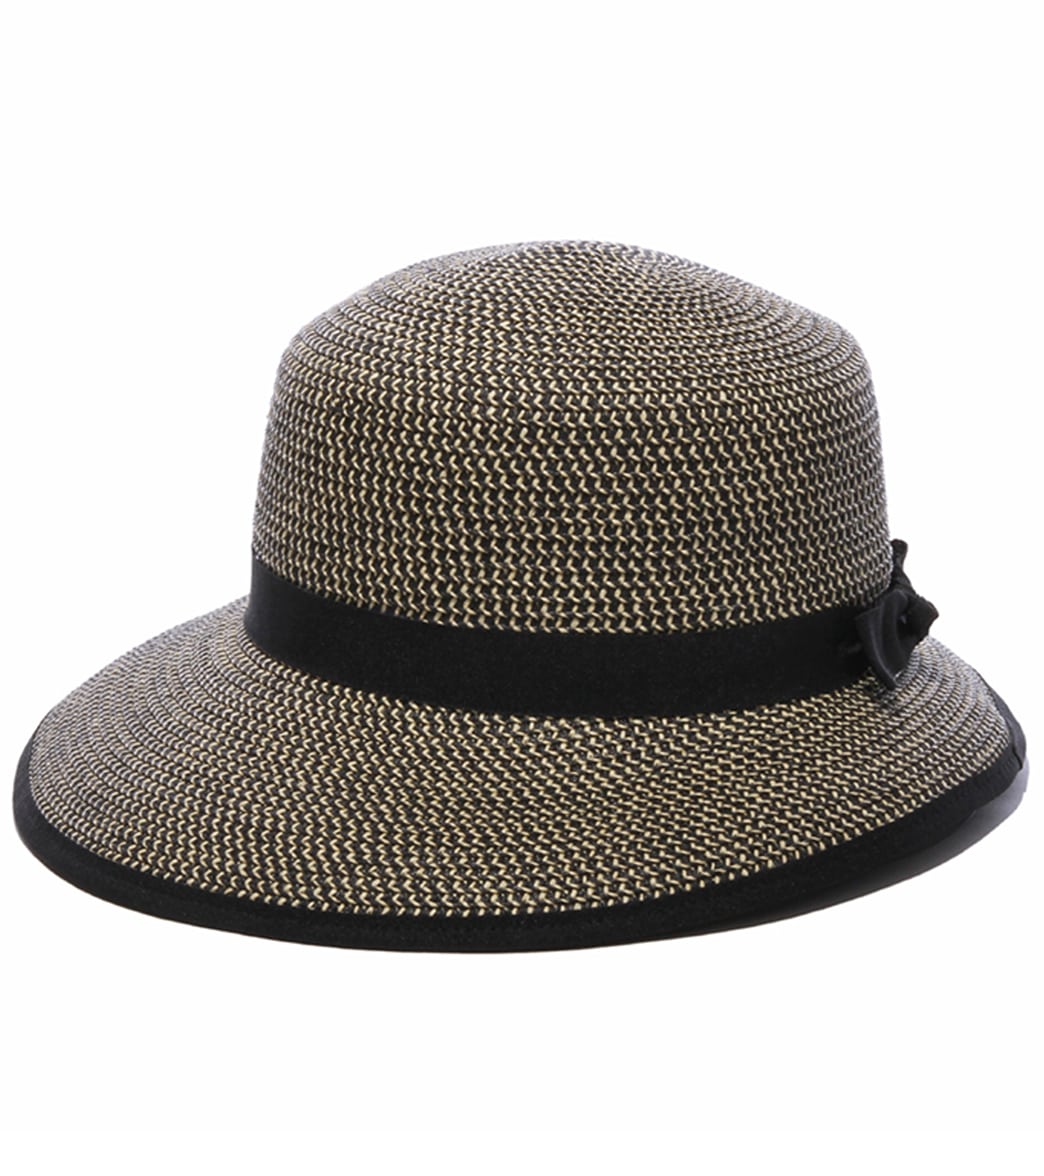 Physician Endorsed Women's Pitch Perfect Contrast Straw Hat - Gold Adjustable - Swimoutlet.com